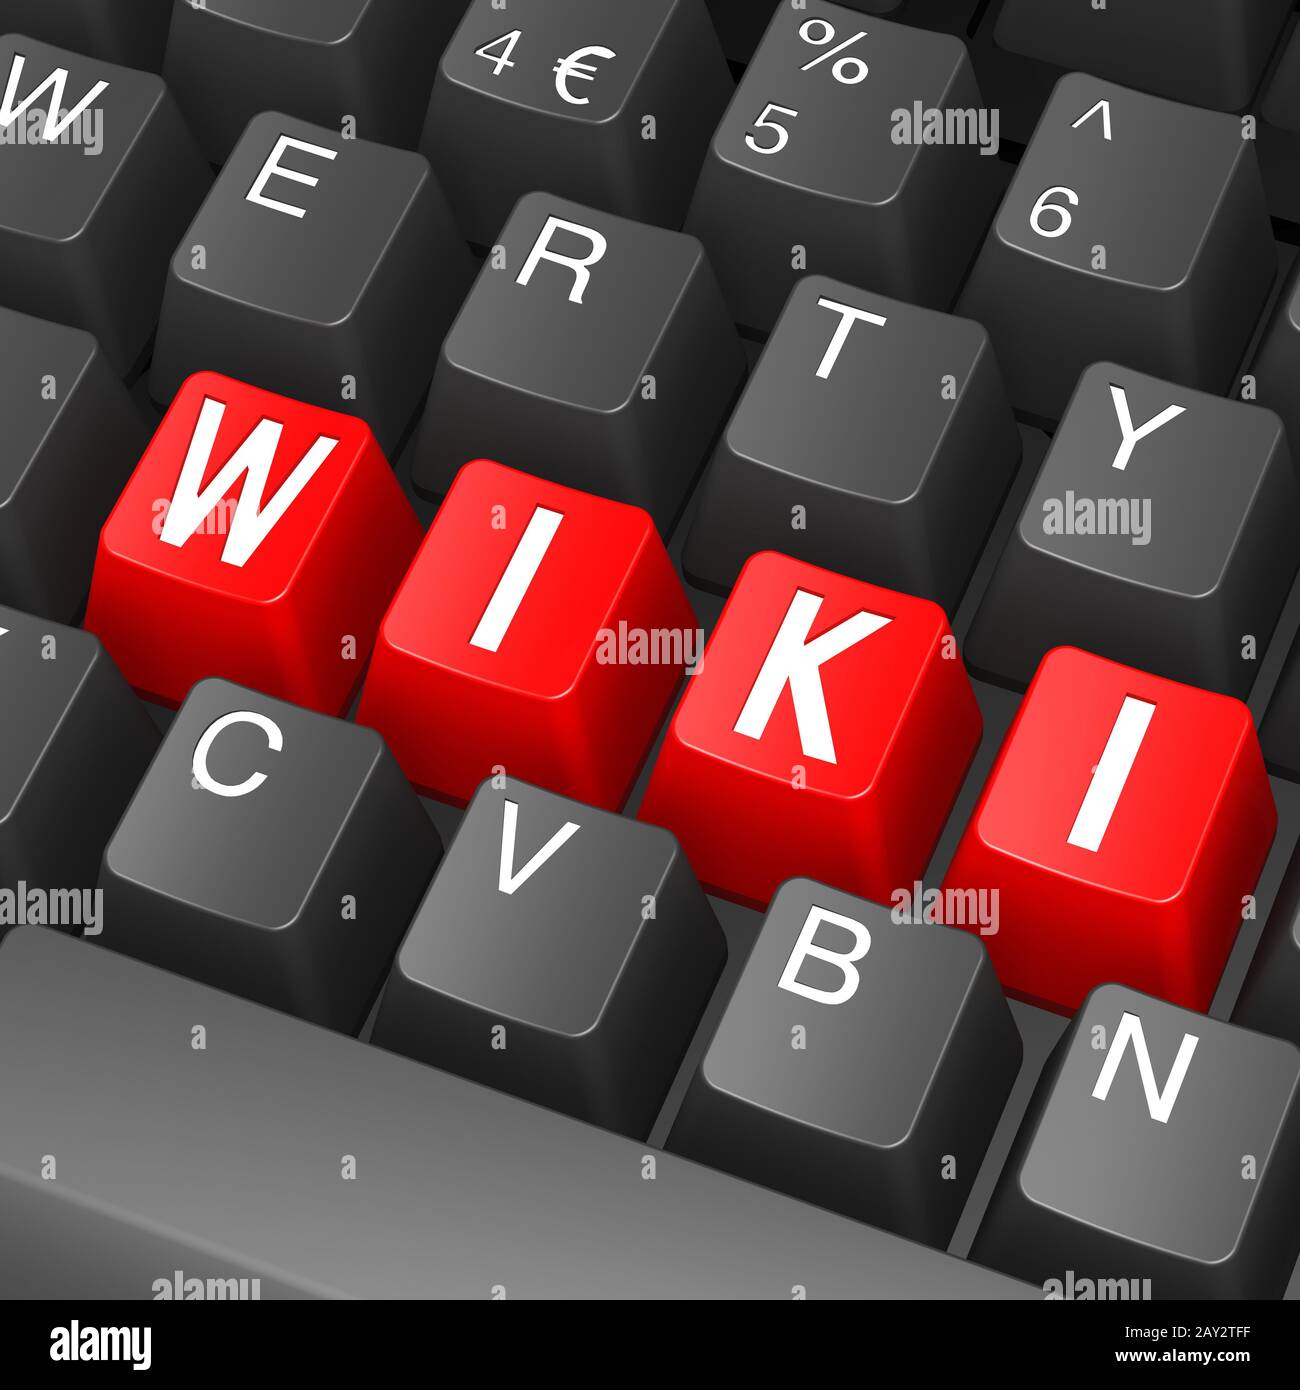 Wiki Keyboard High Resolution Stock Photography and Images - Alamy